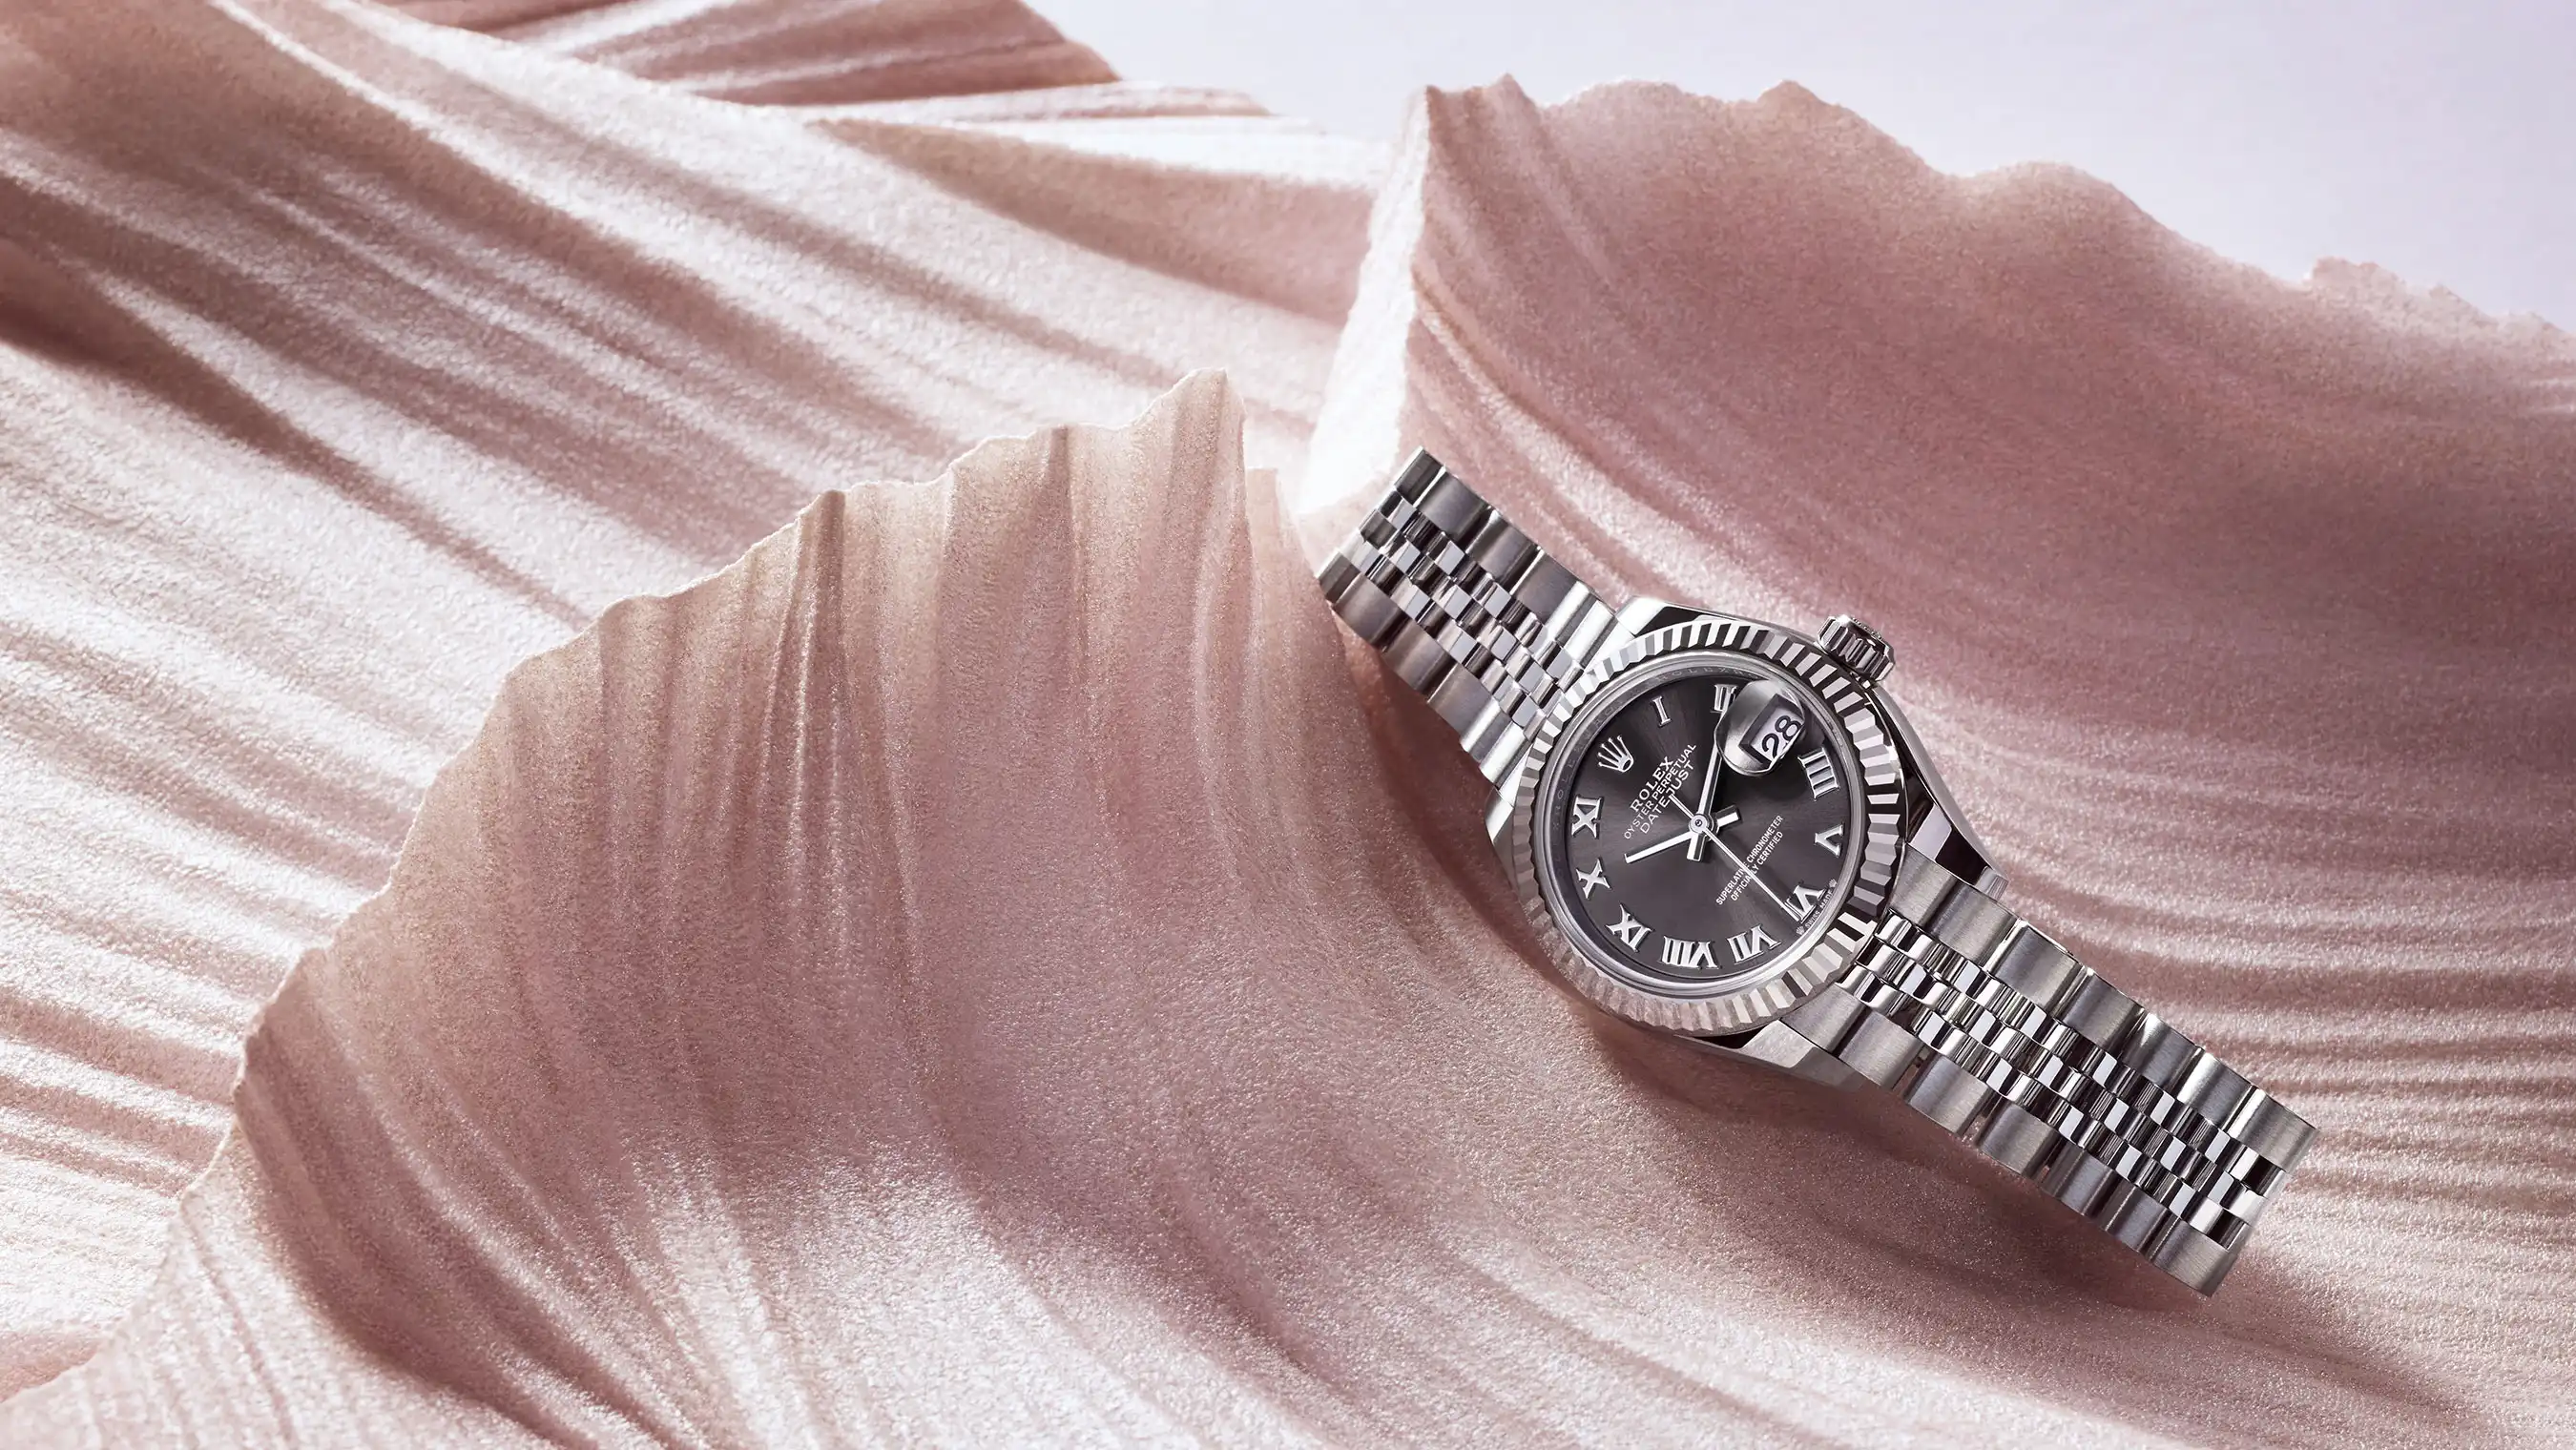 The Lady-Datejust 